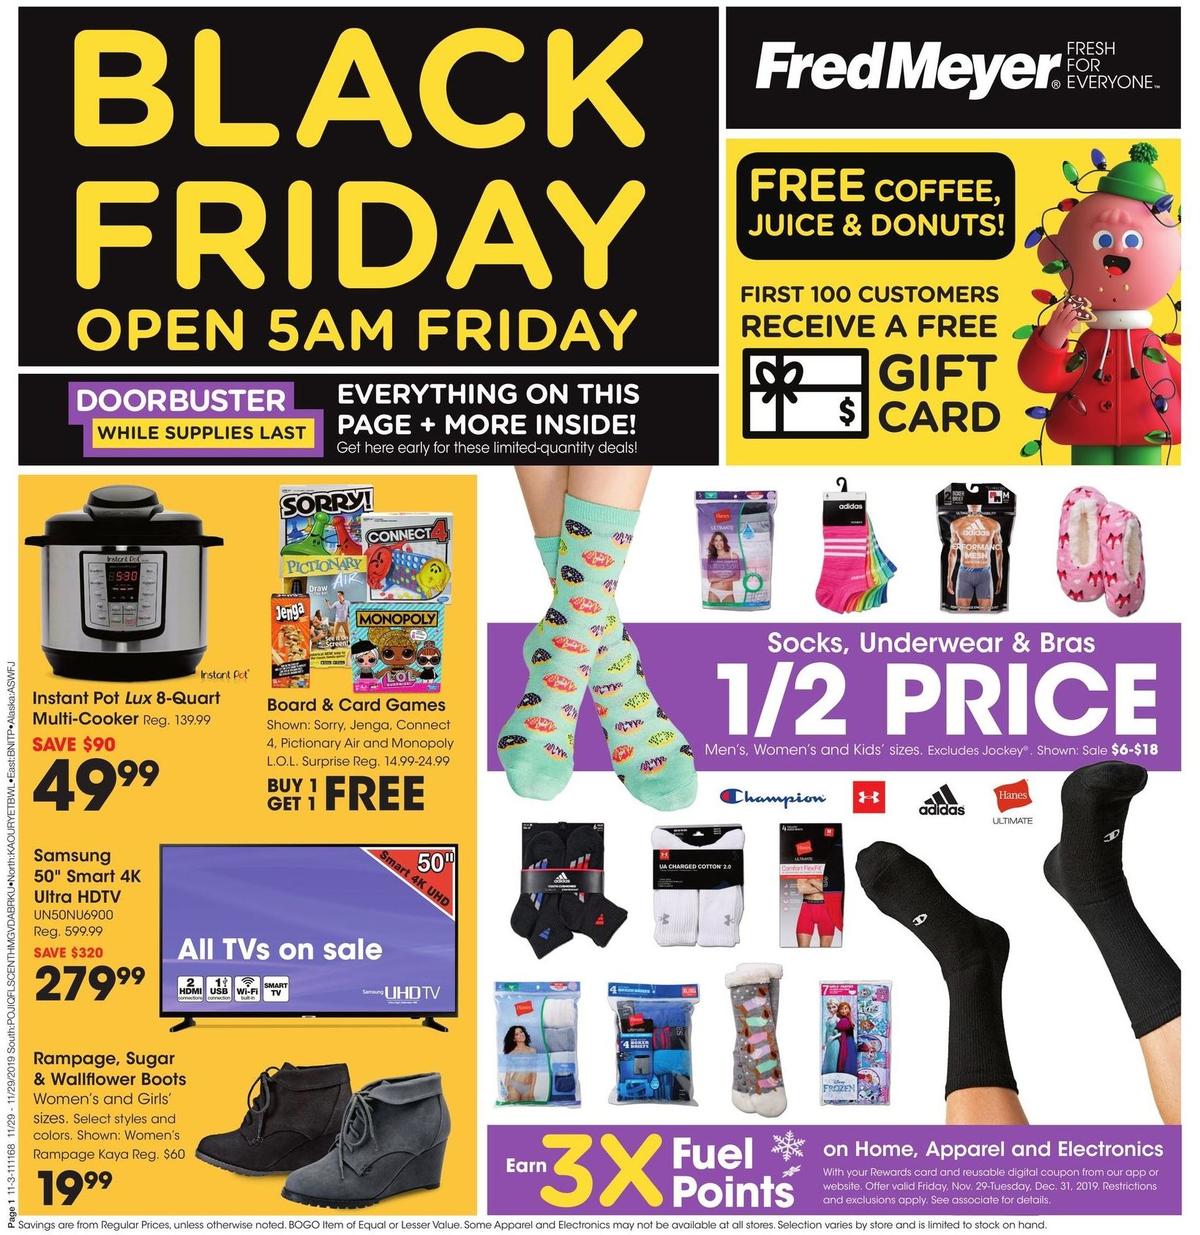 Fred Meyer Black Friday Weekly Ad & Specials from November 29